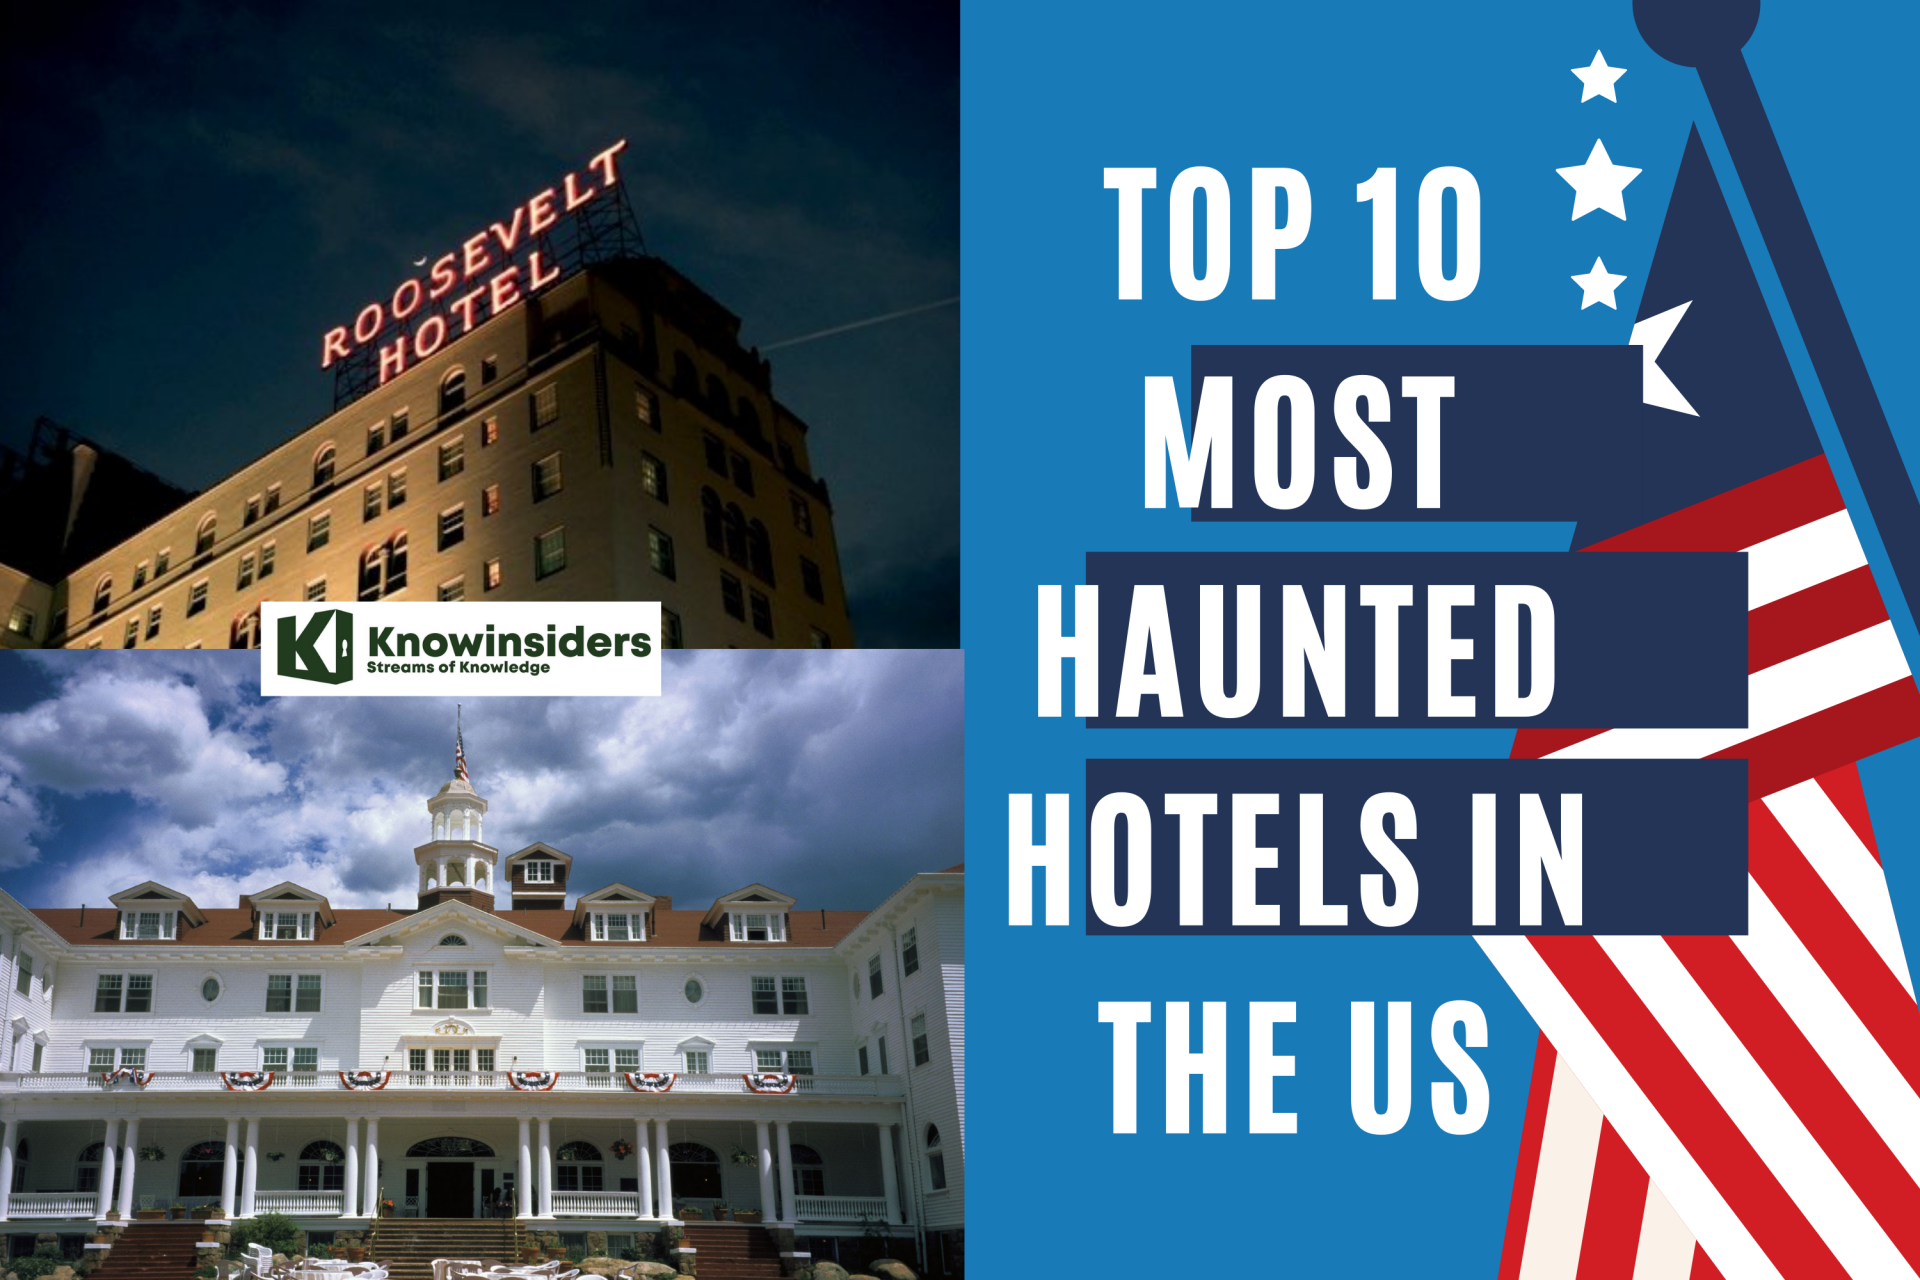 Top 10 Most Haunted Hotels in the U.S With The Horror Ghost Stories